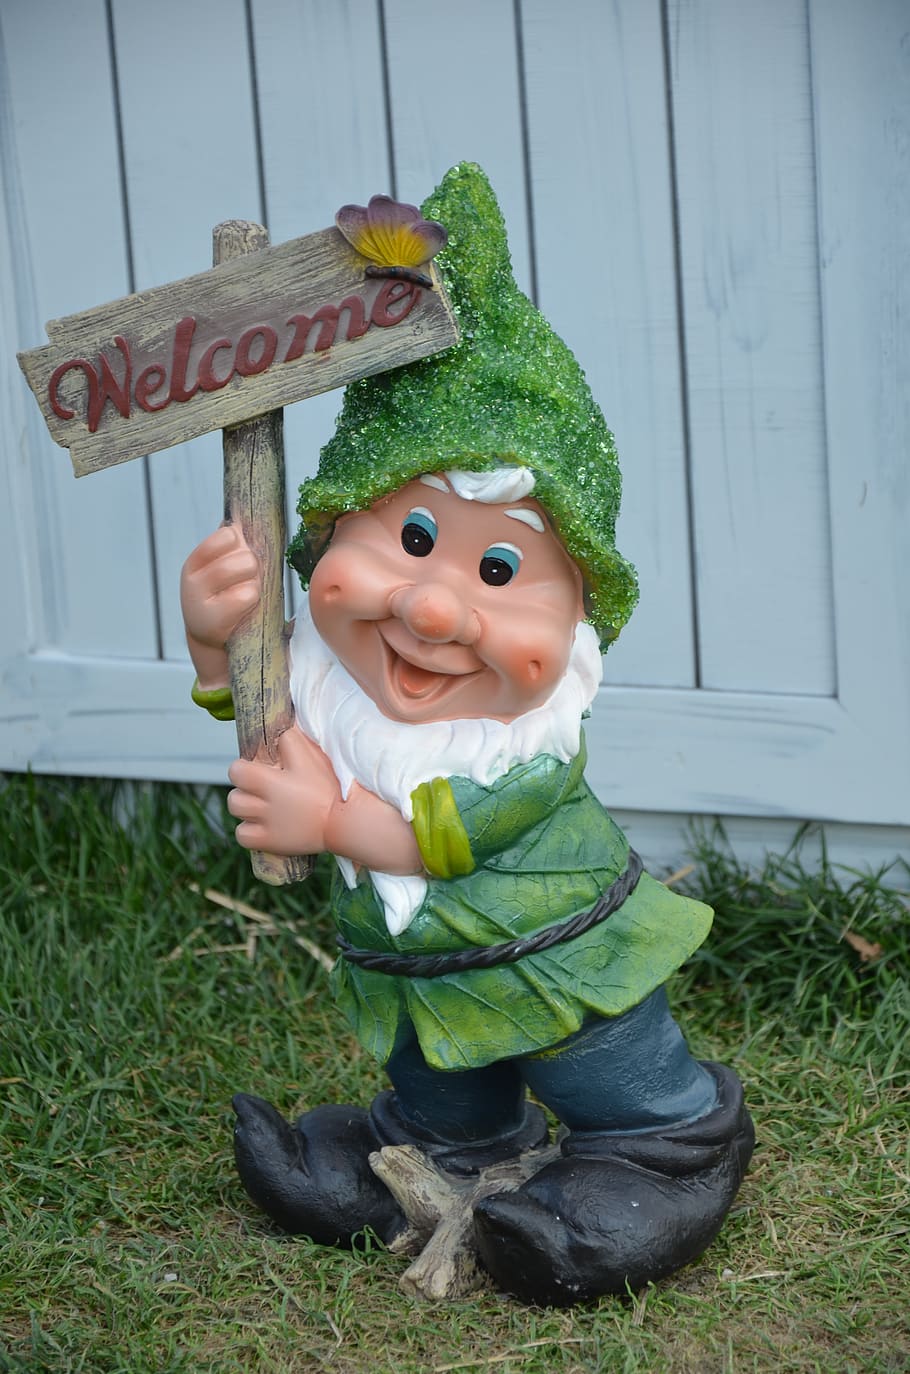 dwarf, welcome sign, smiling dwarf, gnome, childhood, text, one person, representation, cute, child